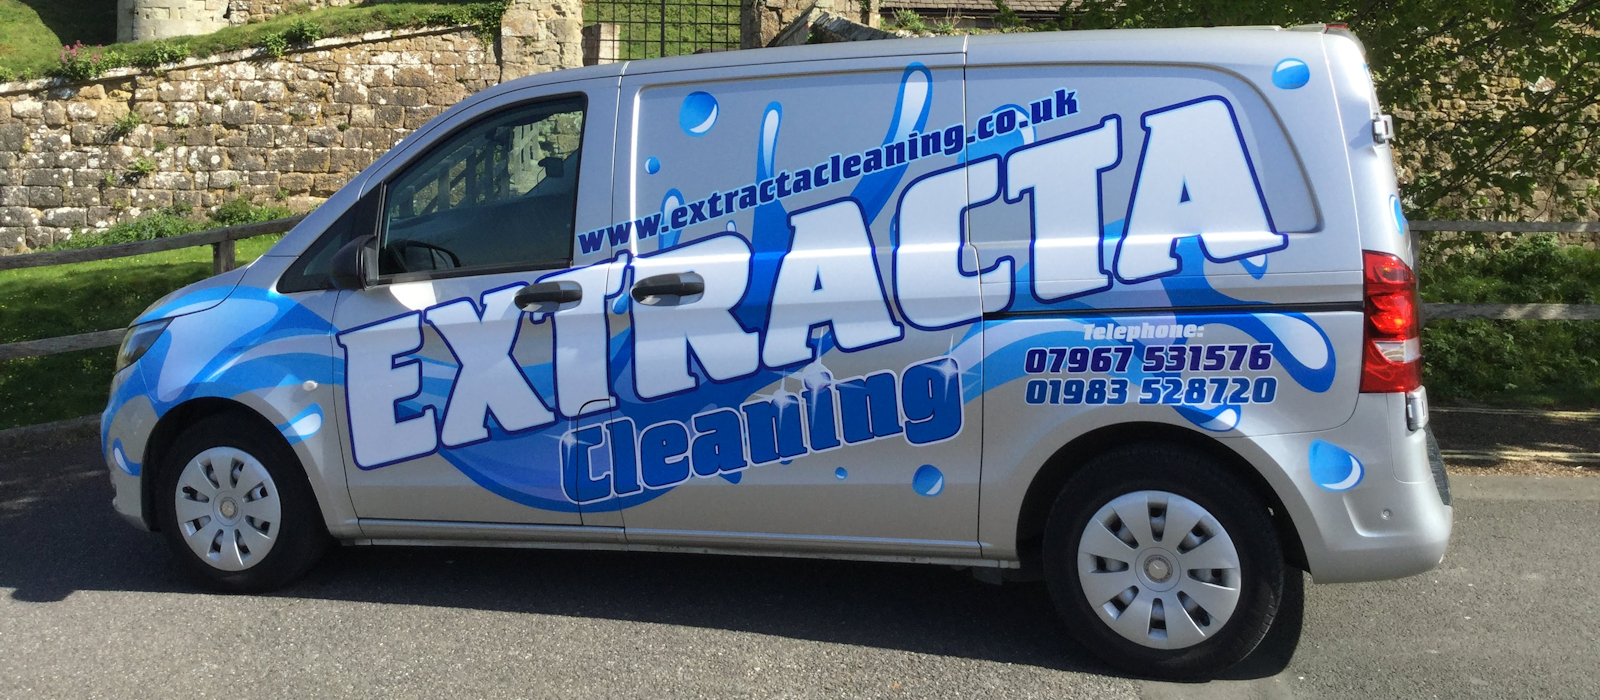 Carpet & Upholstery Cleaning Isle of Wight